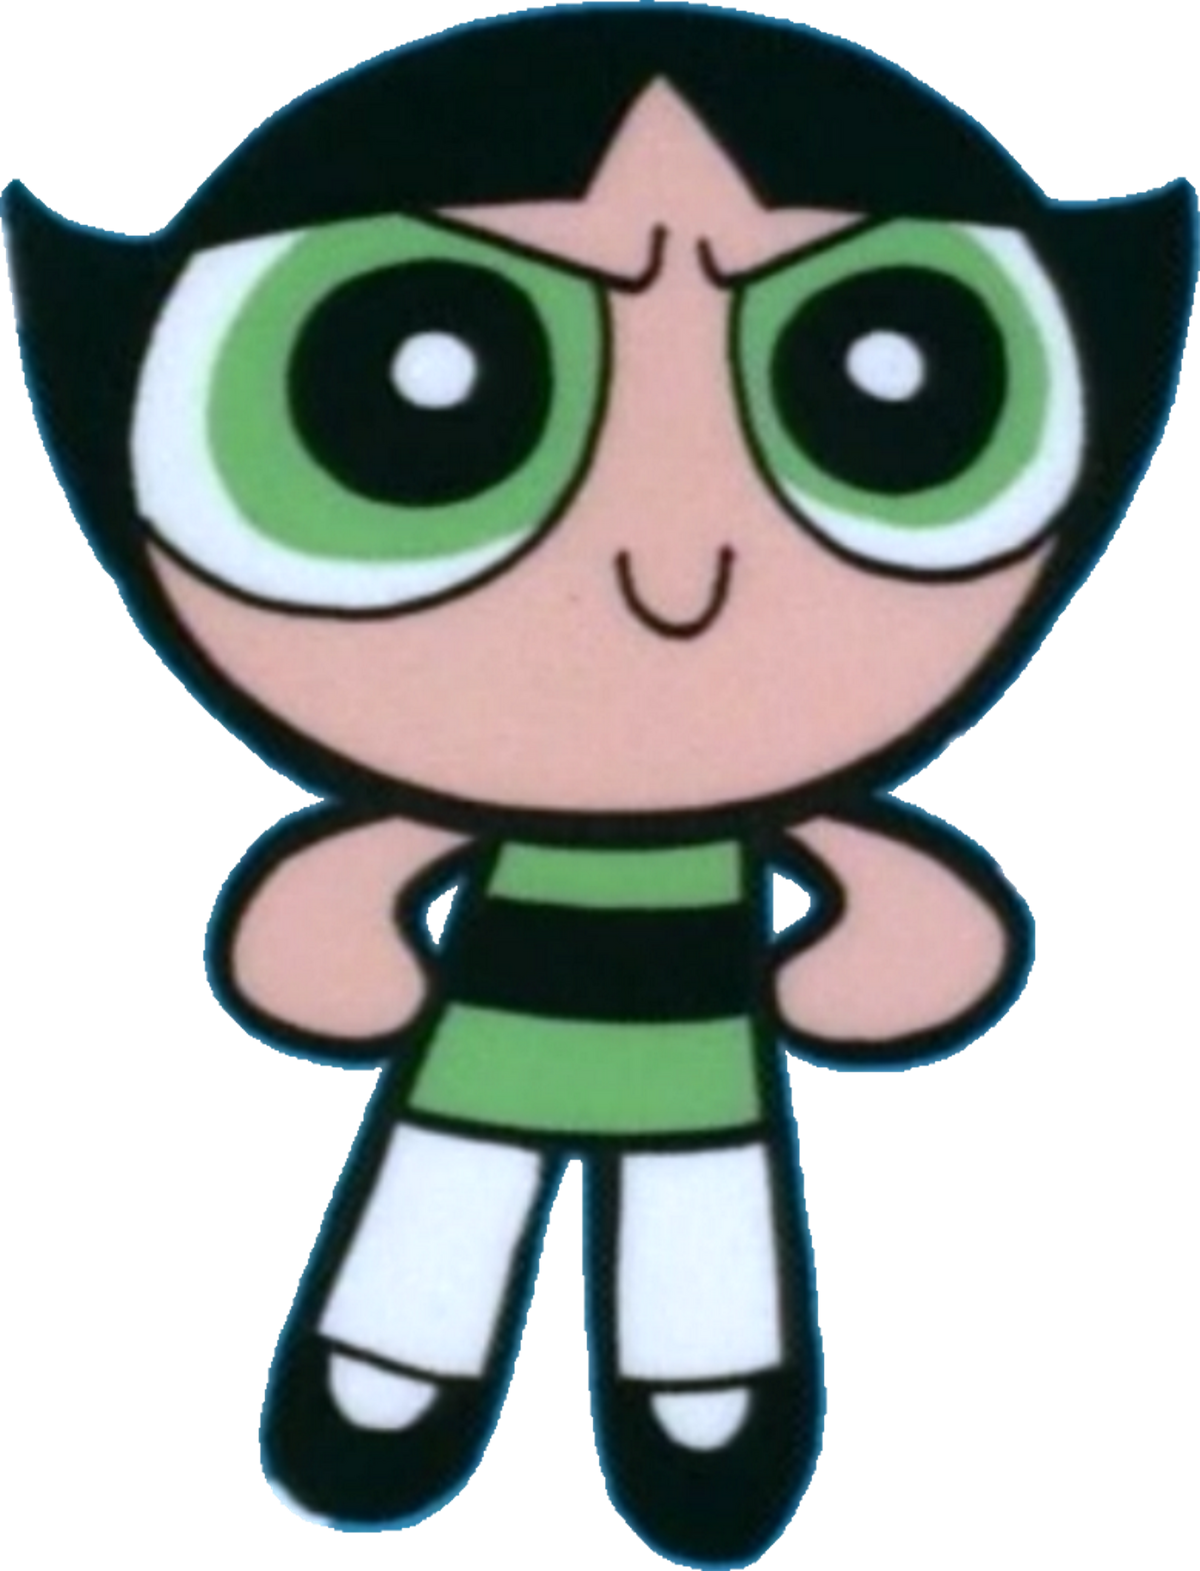 Buttercup (character) Scratchpad Fandom picture